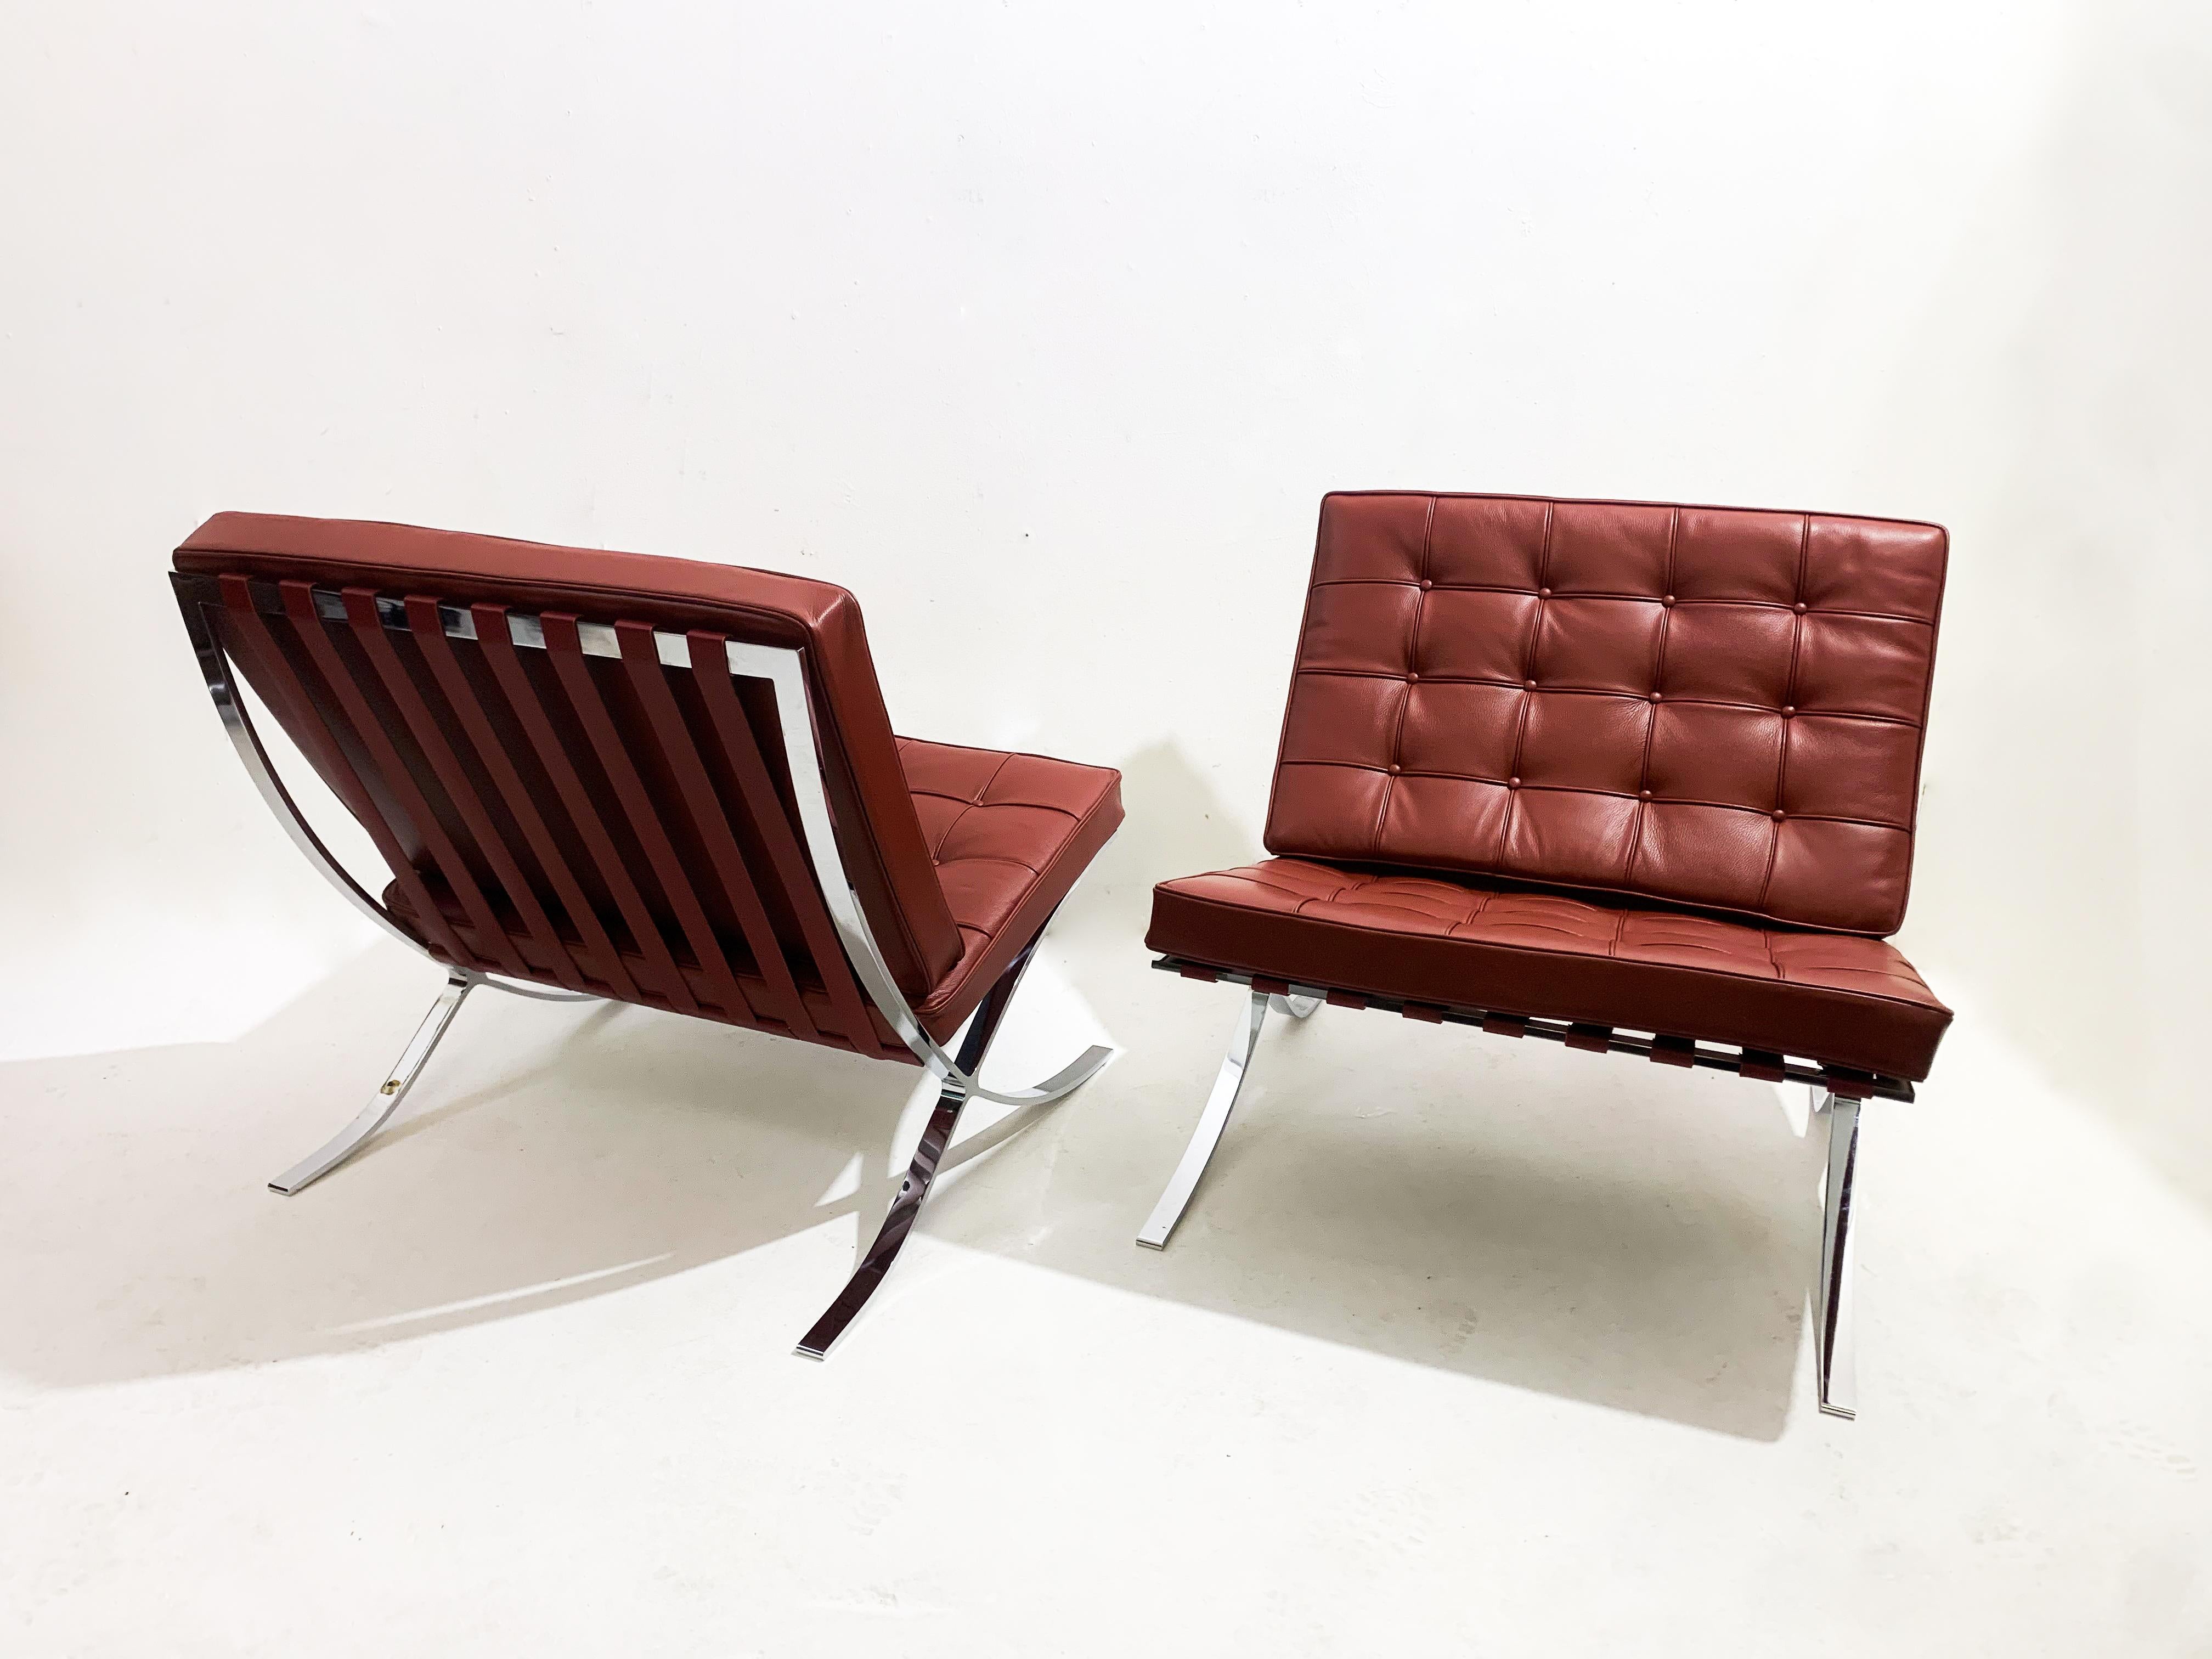 Pair of Burgundy Leather Barcelona Chairs by Mies Van Der Rohe for Knoll, 1990s For Sale 1